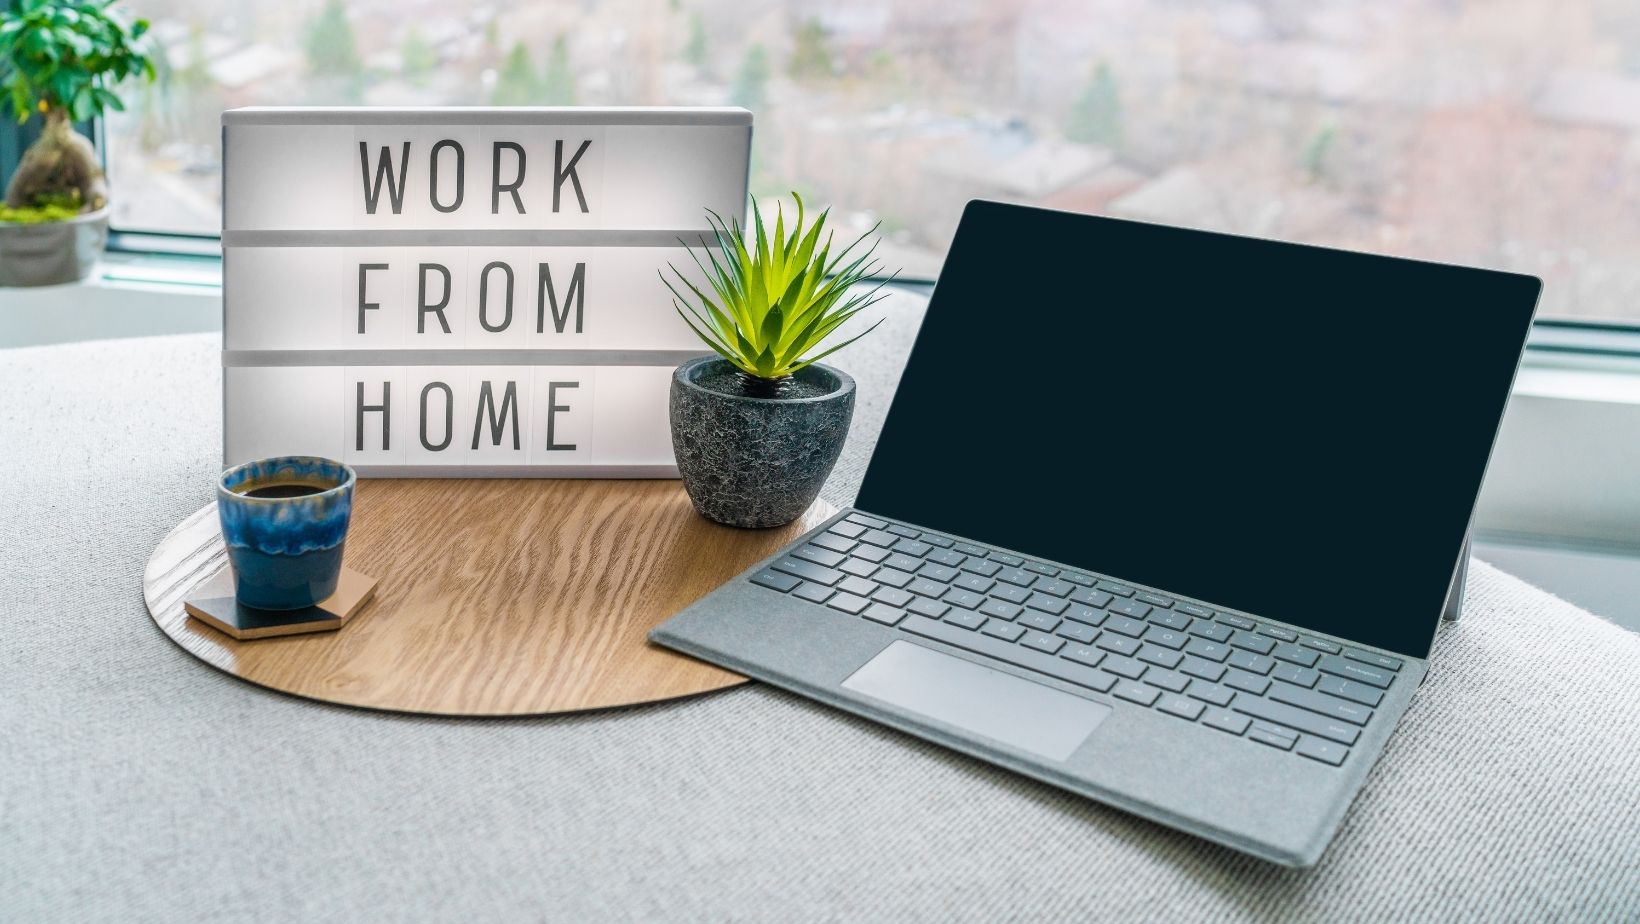 How Remote Work Continues to Impact Real Estate